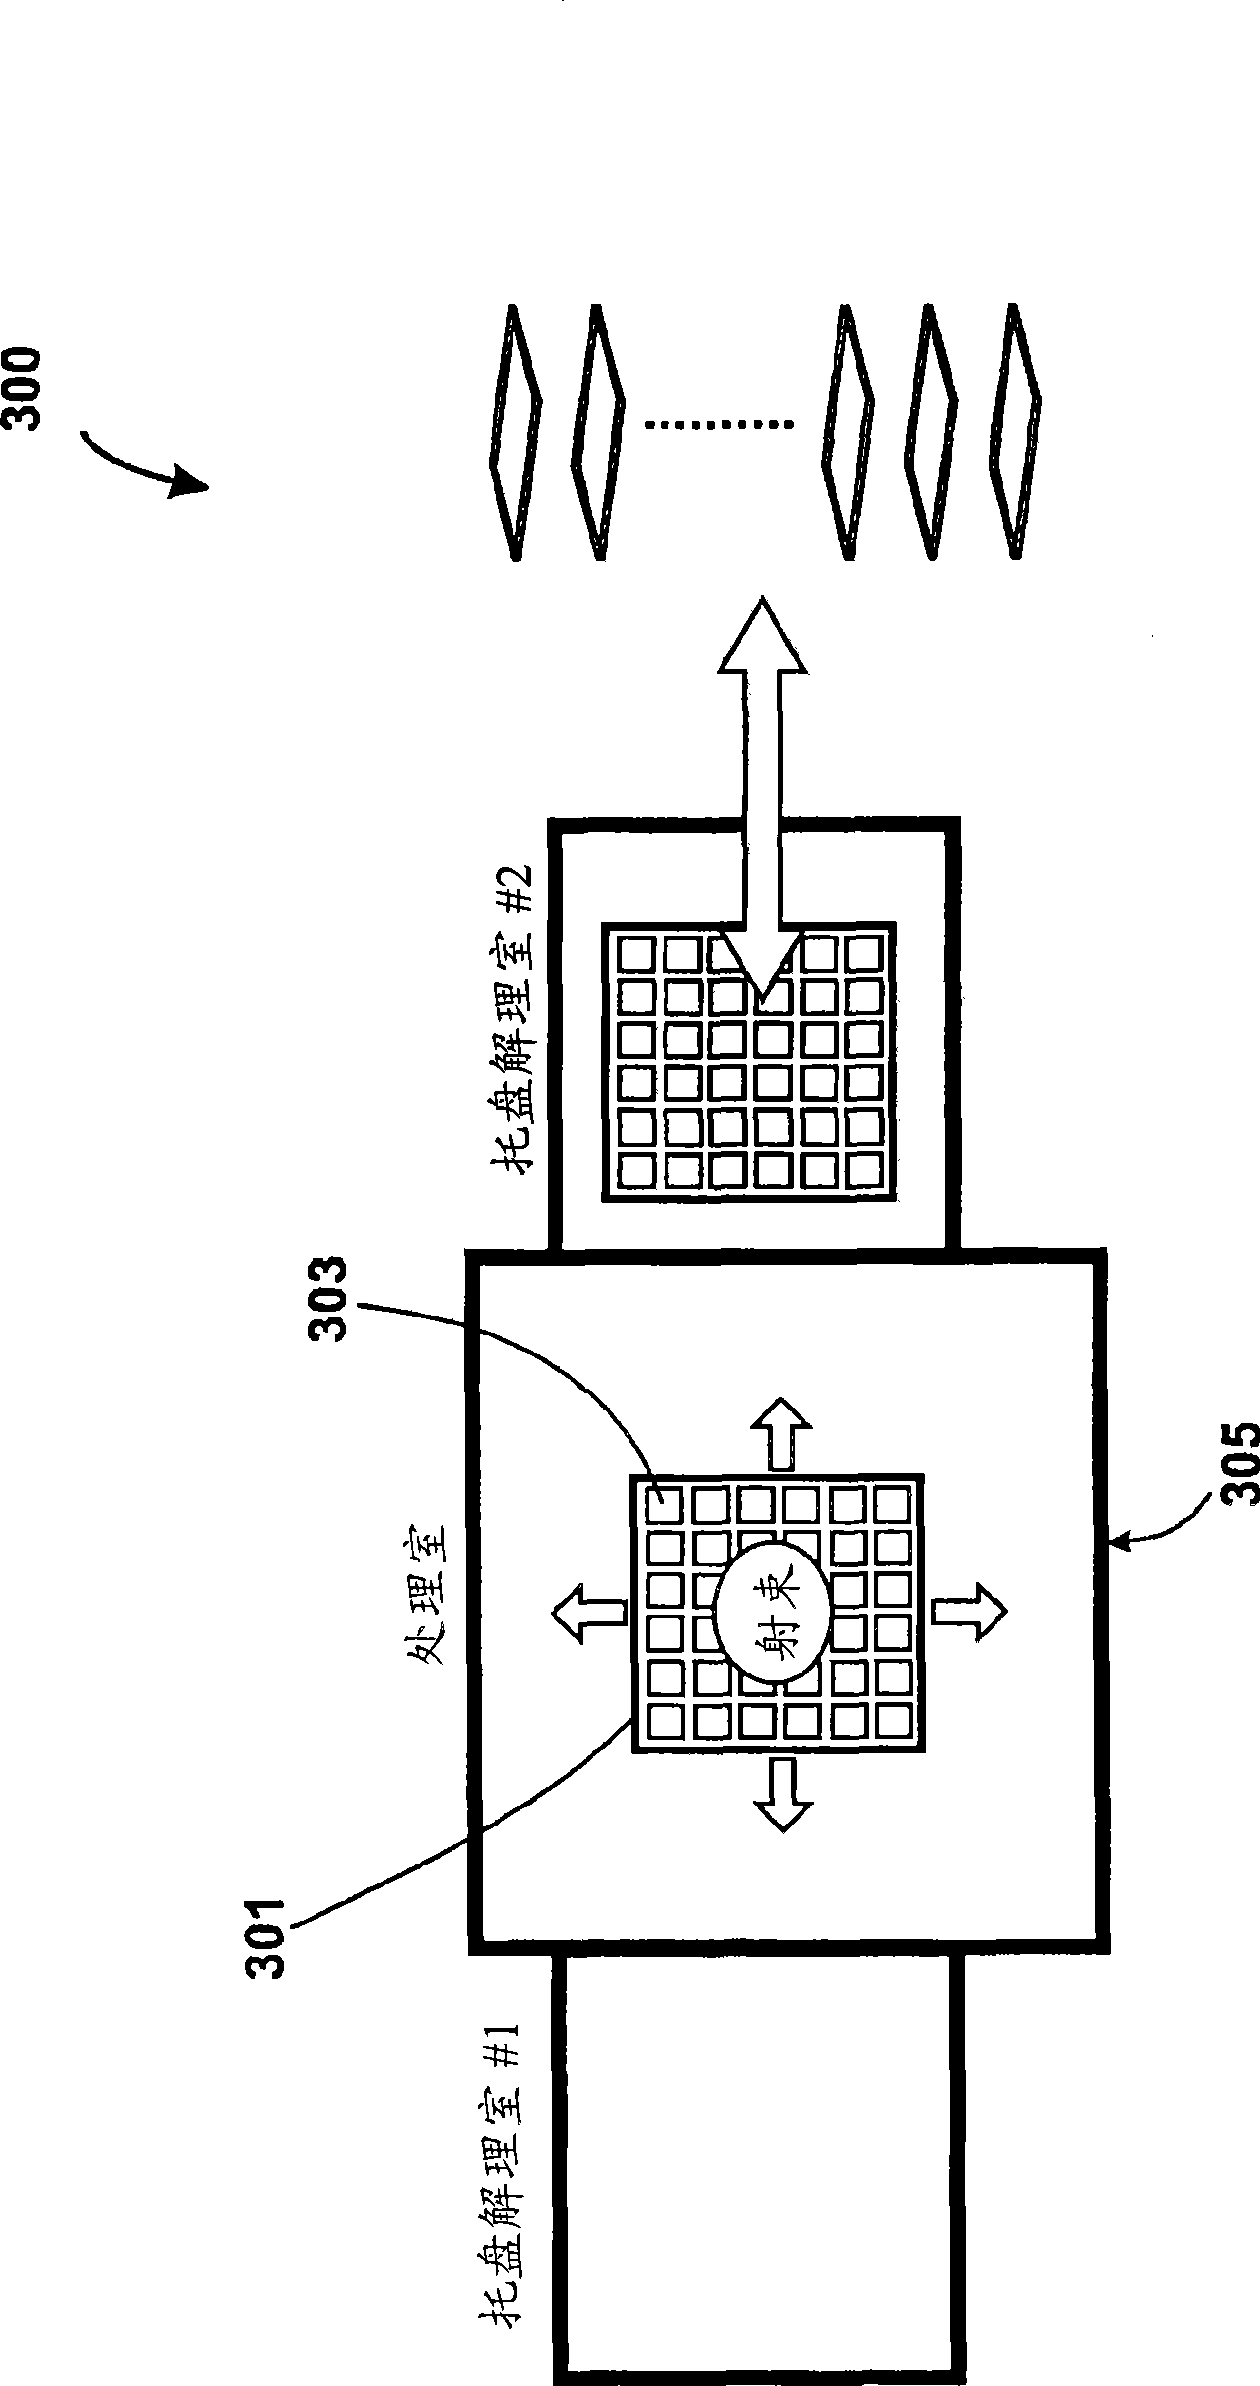 Apparatus and method for introducing particles using a radio frequency quadrupole linear accelerator for semiconductor materials